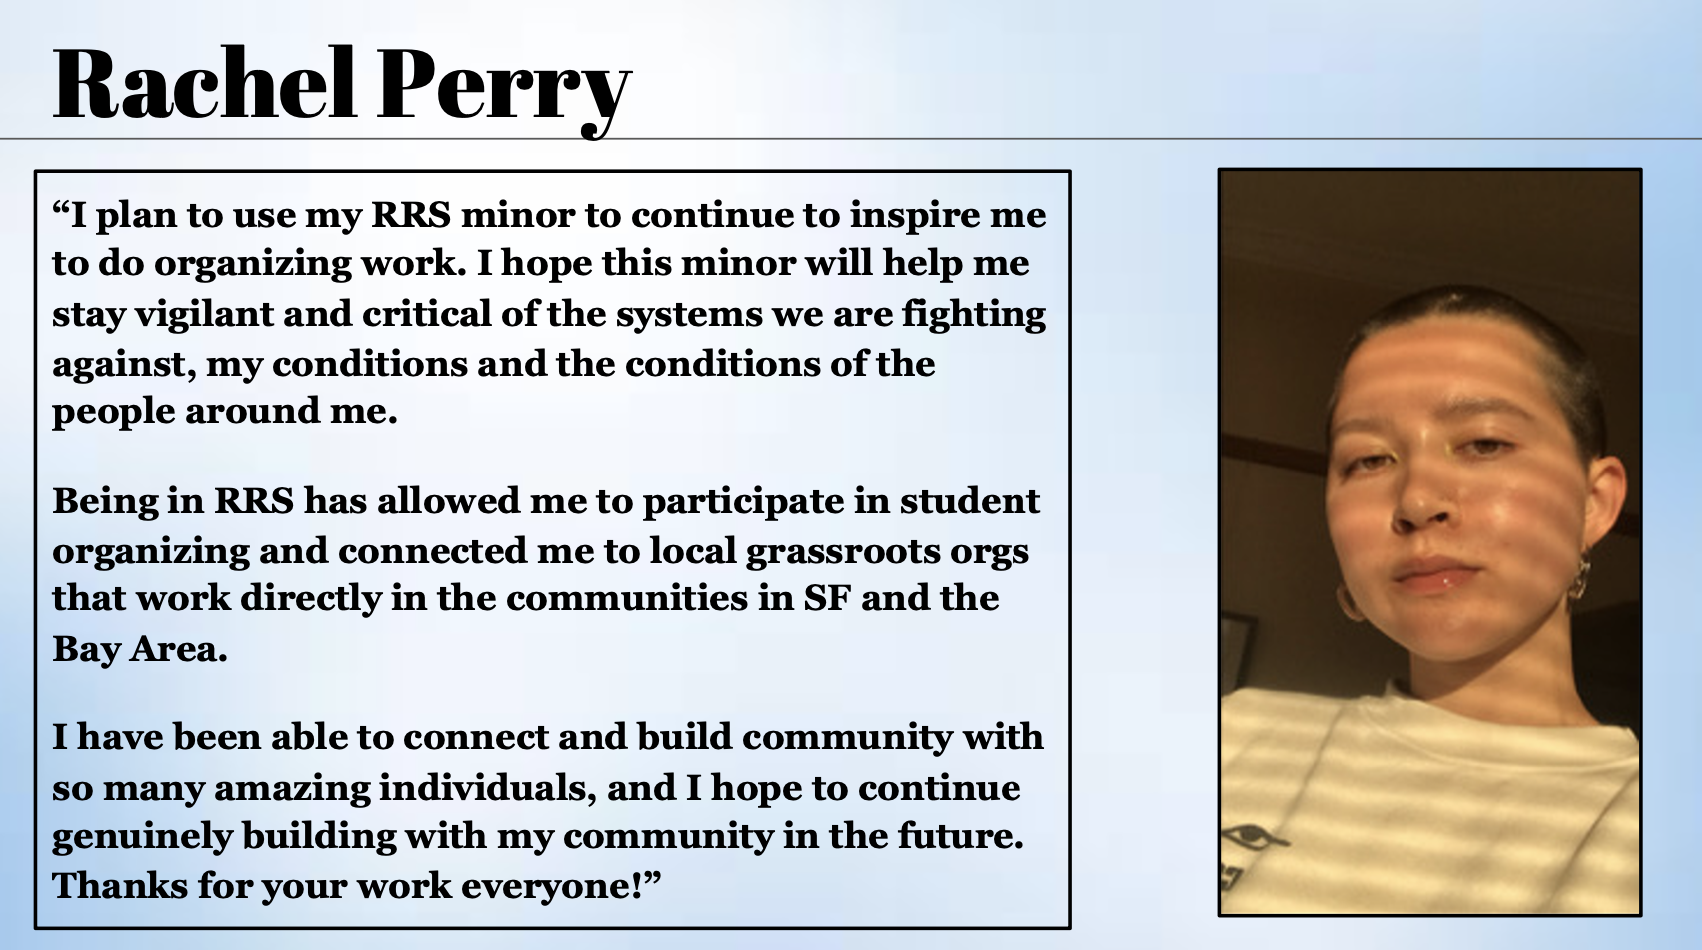 Rachel Perry plans to use her RRS minor to continue to inspire me to do organizing work.